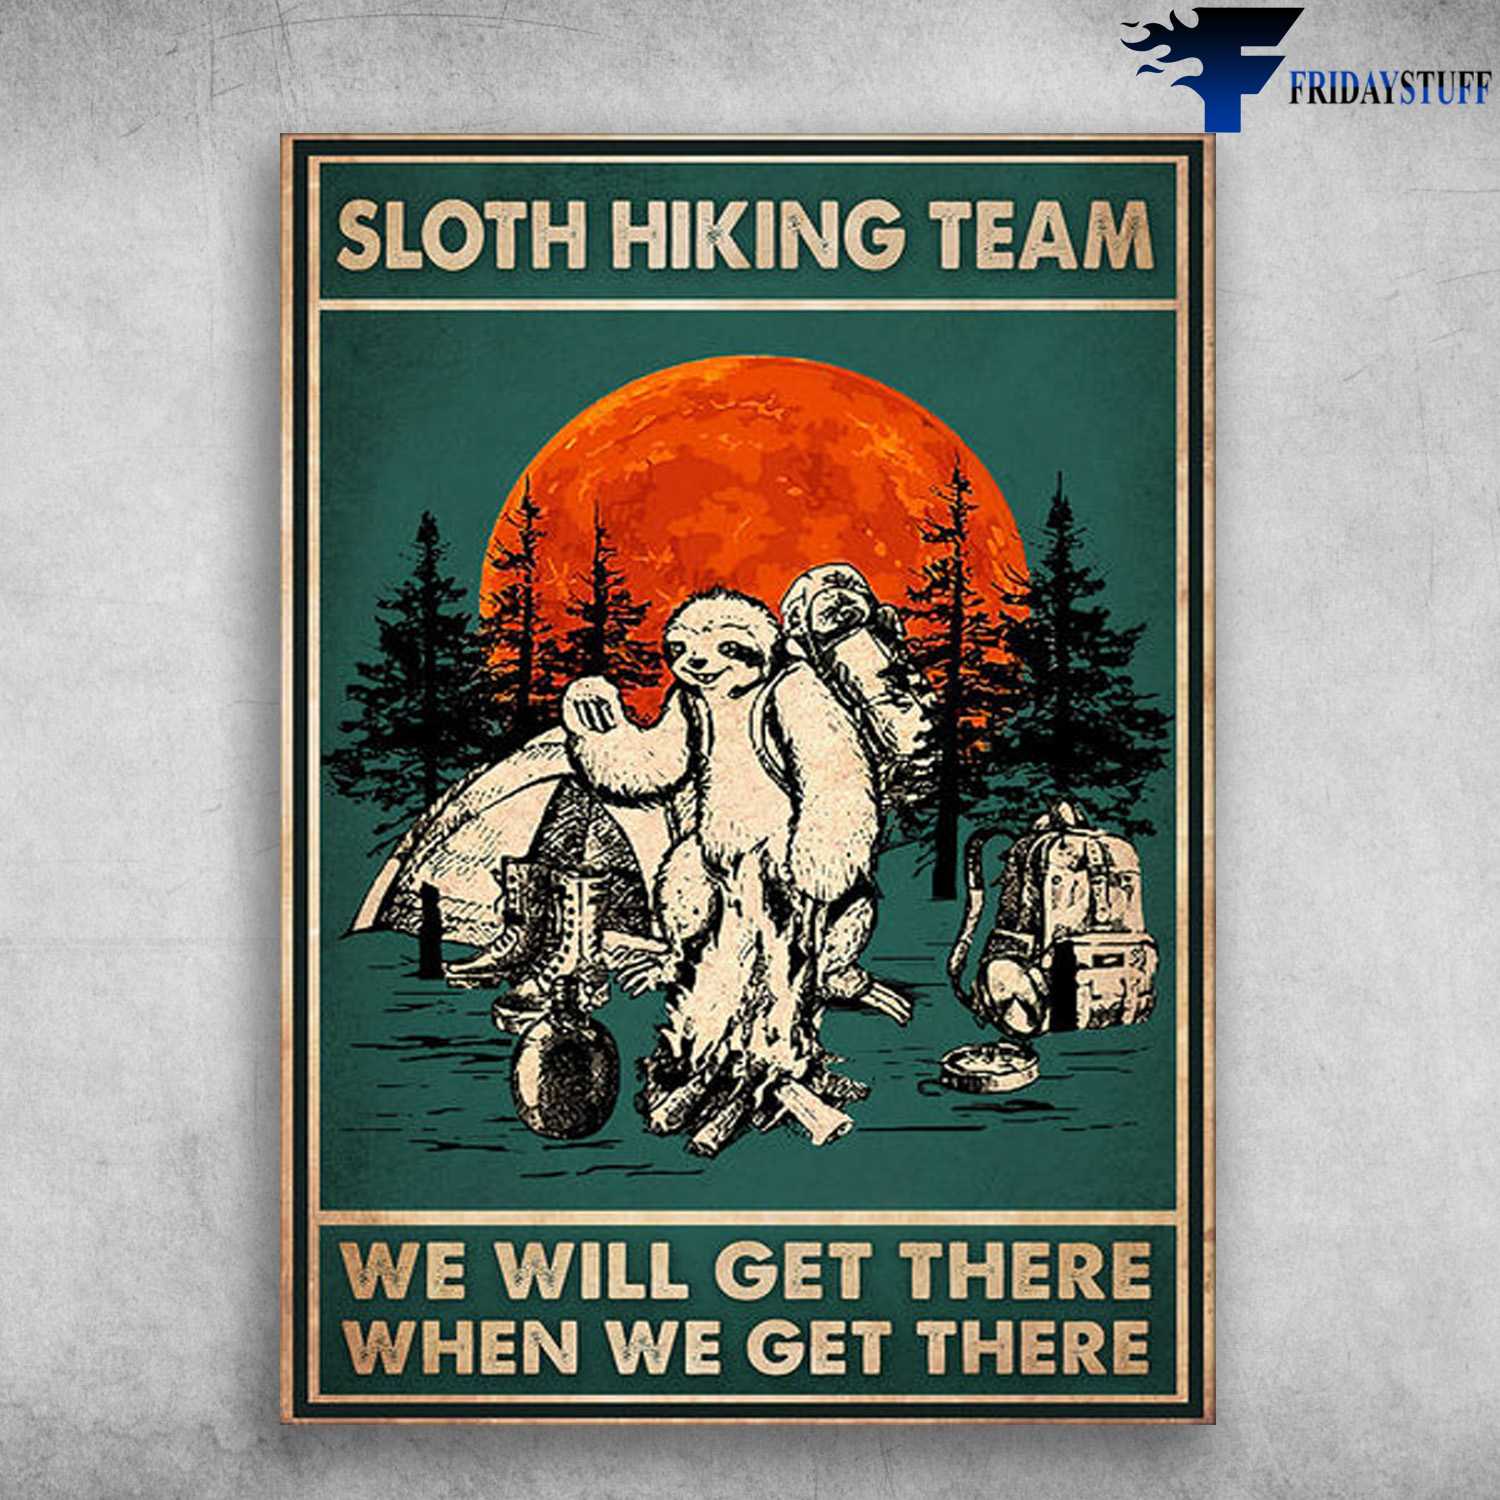 Hiking Sloth, Camping In Forest - Sloth Hiking Team, We Will Get There, When We Get There